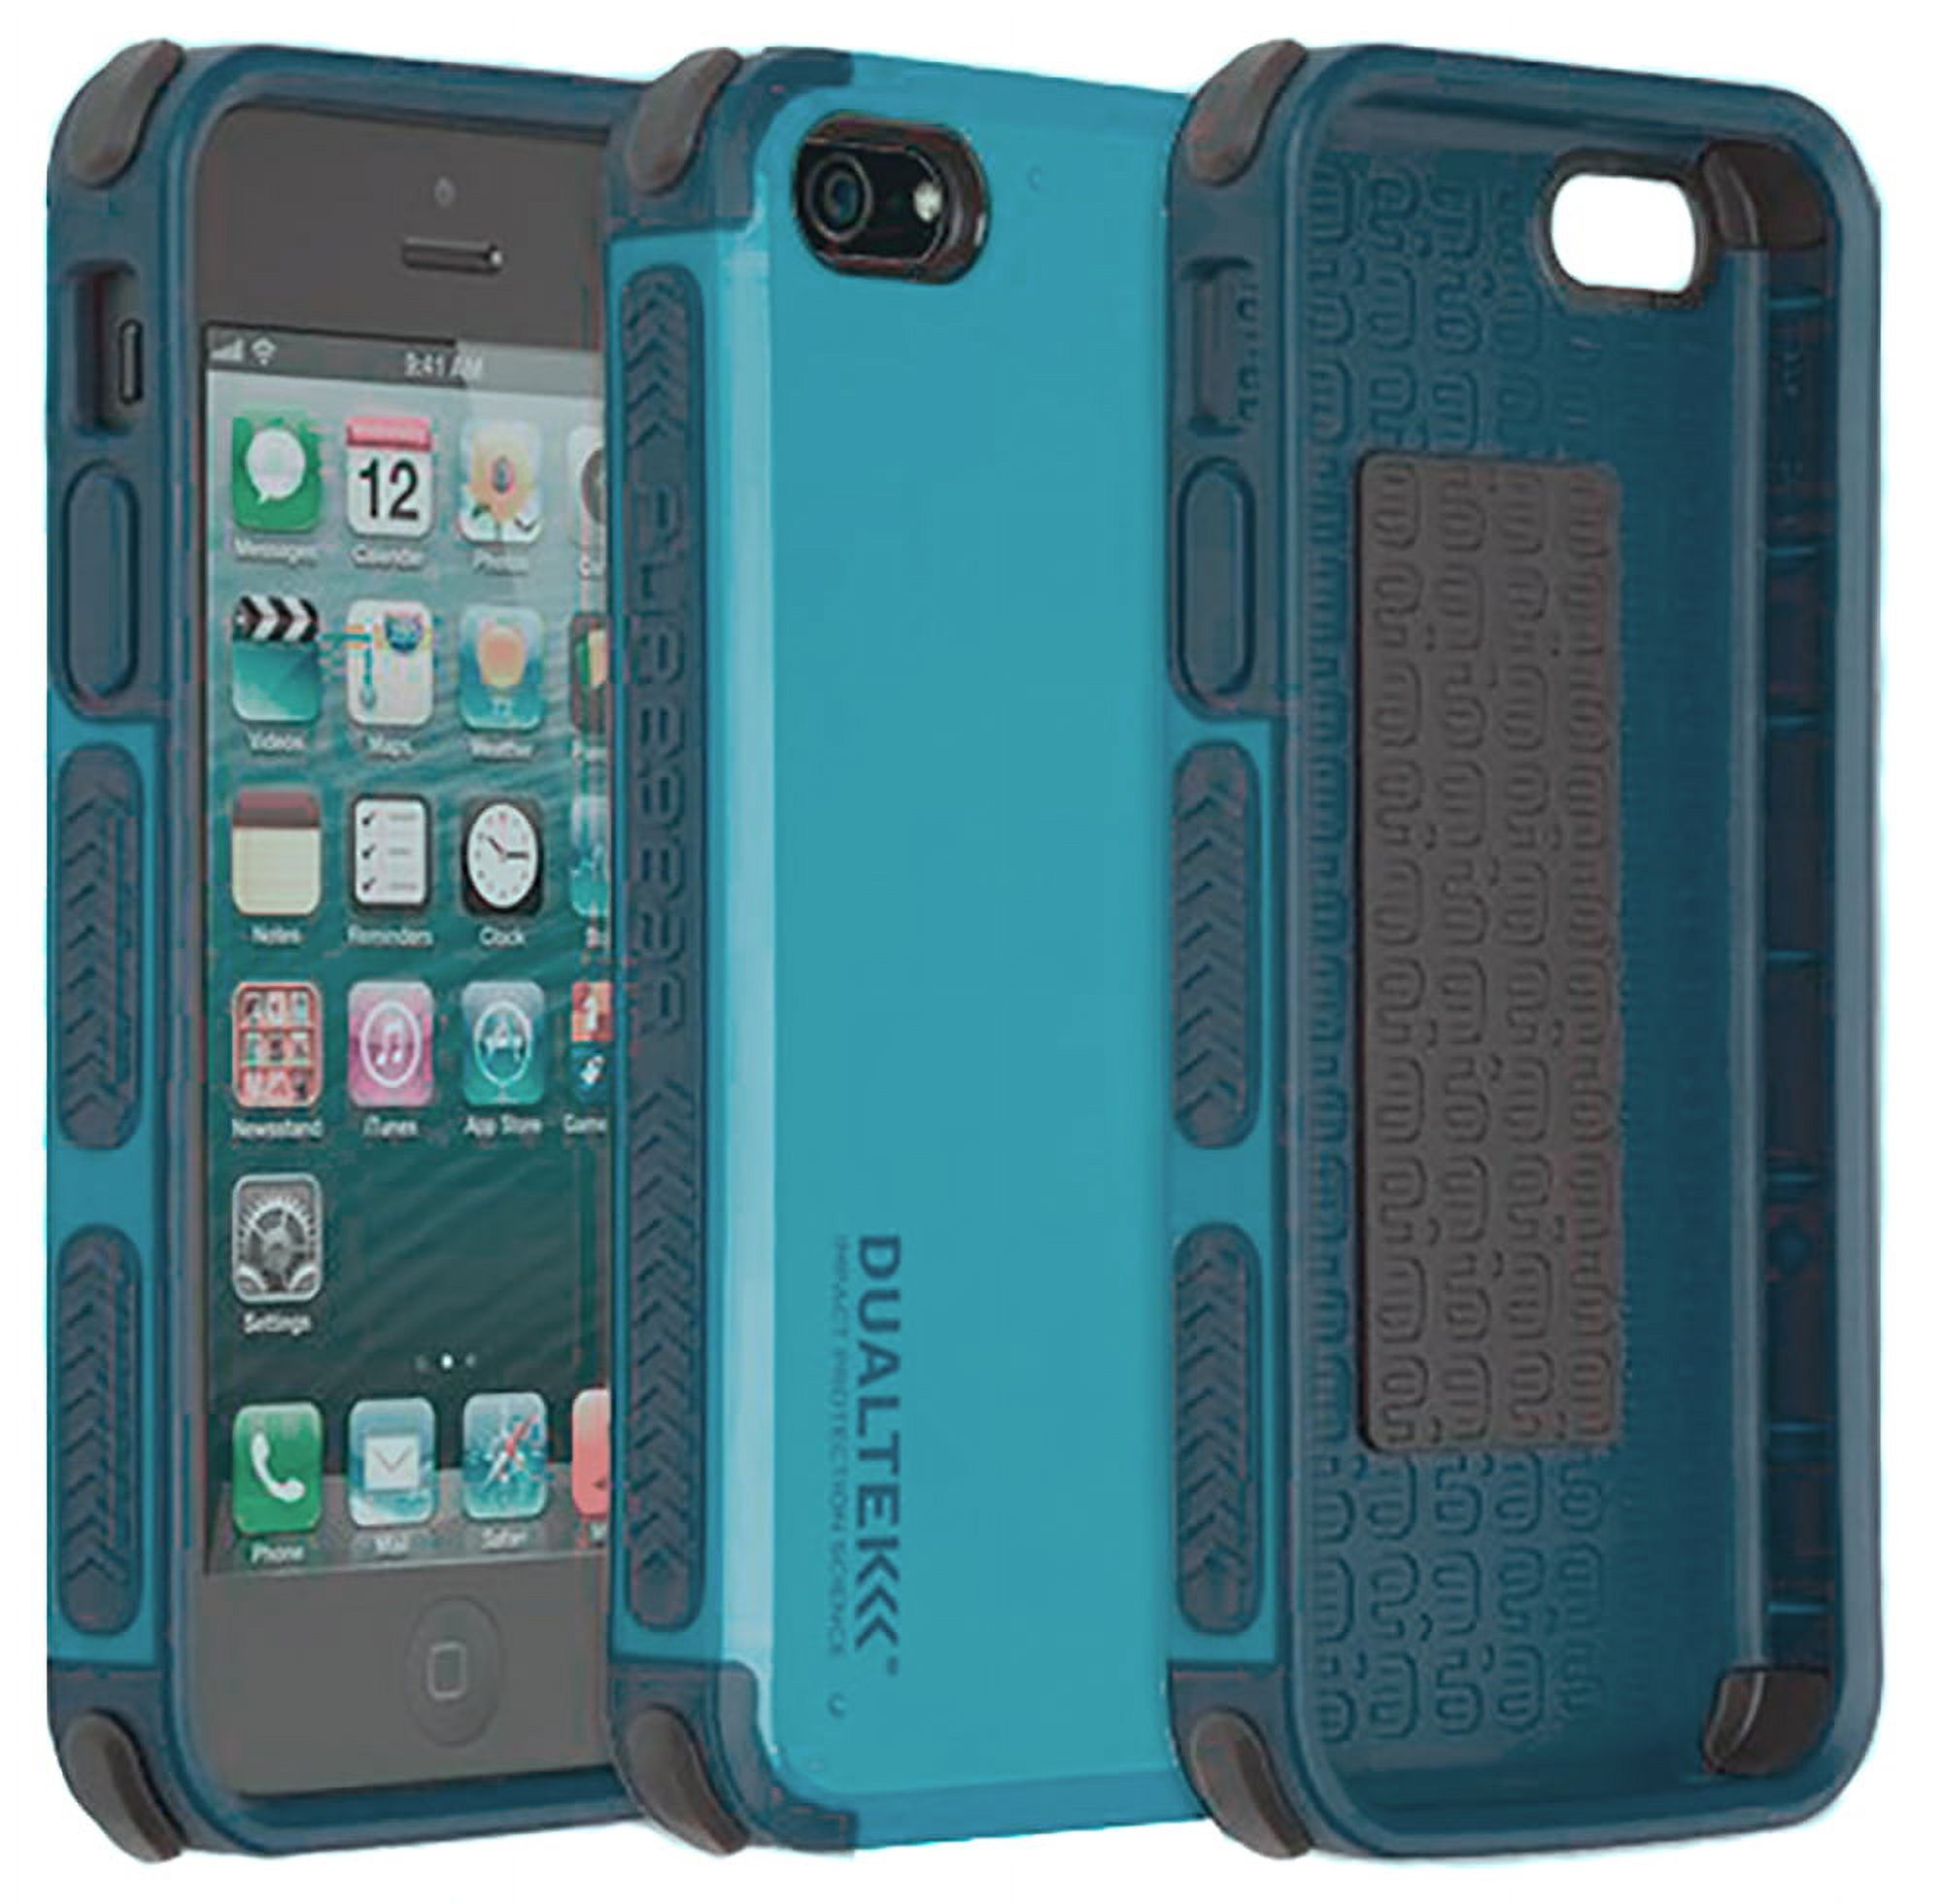 Case for iPhone 5/5S/5c SE, PureGear [Caribbean Blue] Dualtek Extreme Rugged Cover for Apple iPhone 5/5s/5c/SE 2016 - image 1 of 5